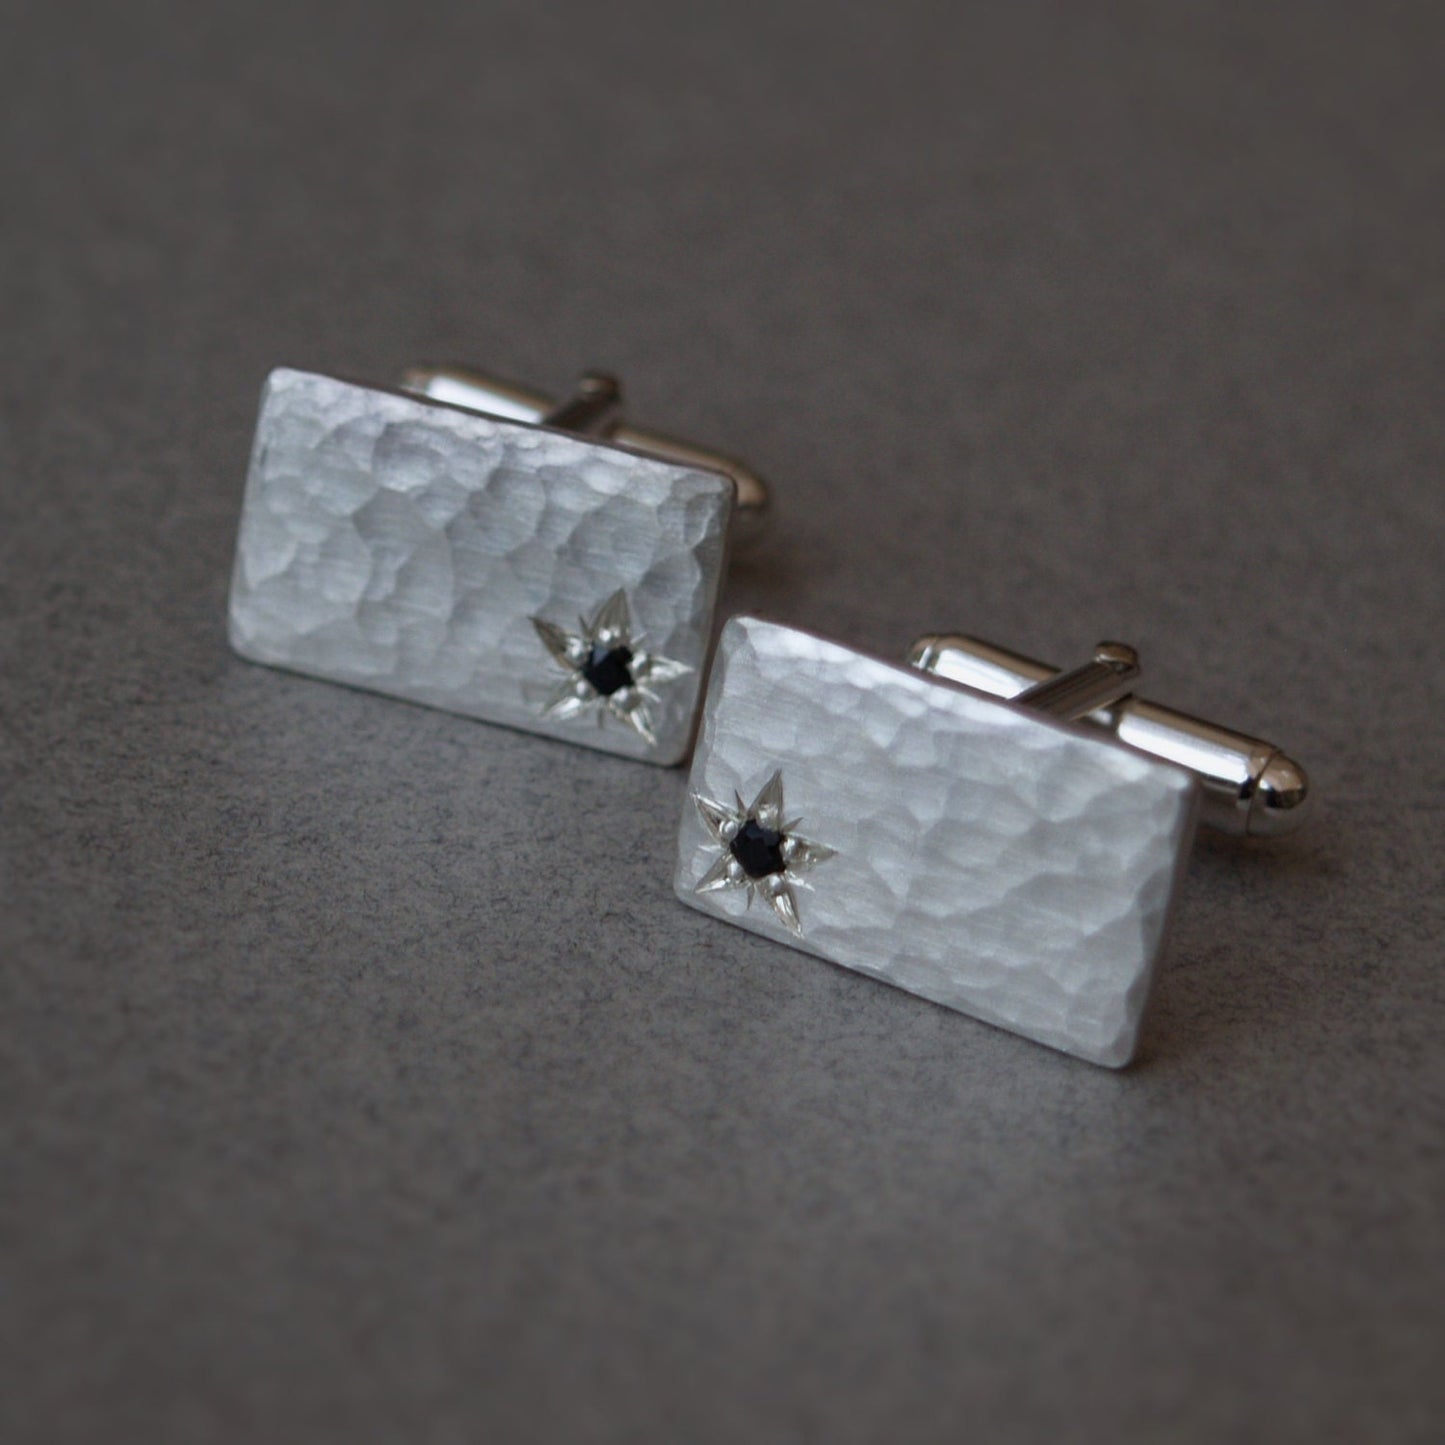 Handmade silver hammered rectangle heavy cufflinks star engraved set with black Sapphires